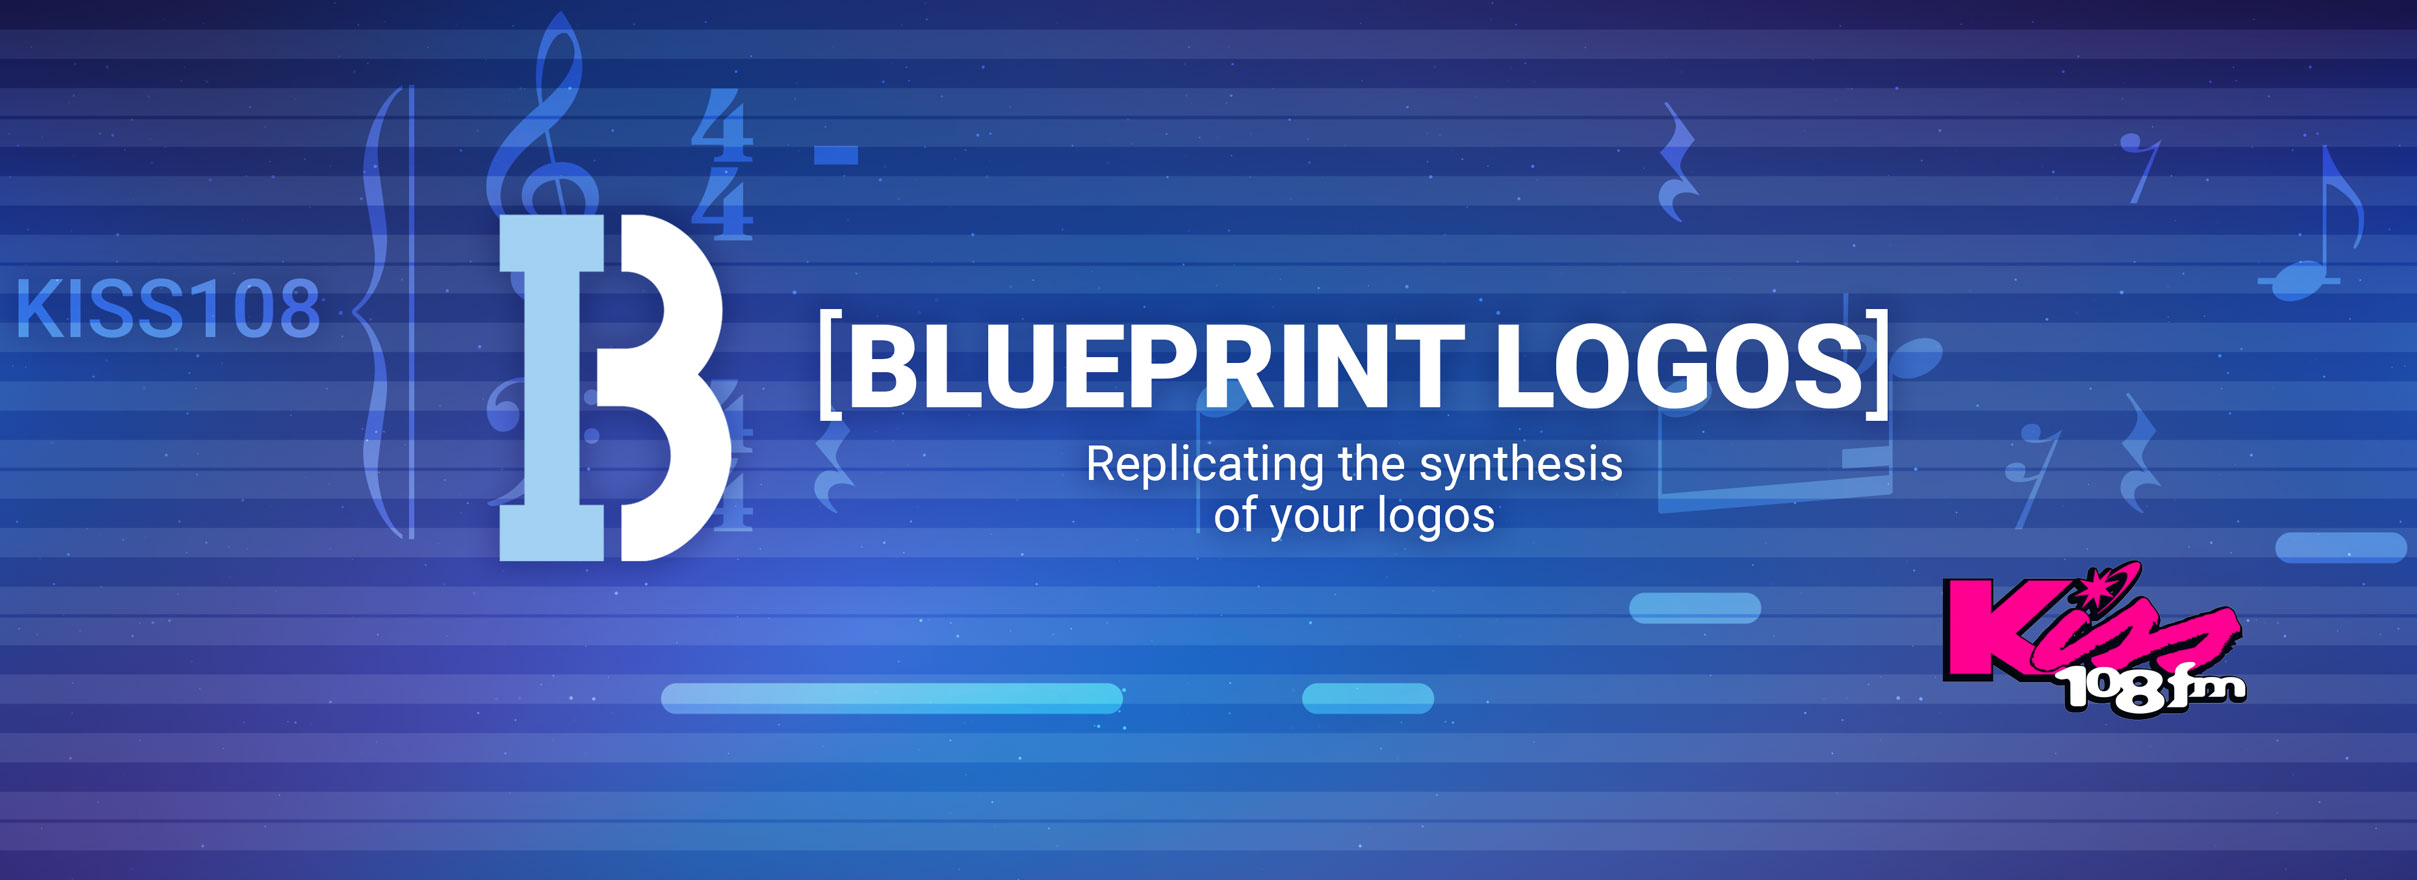 Blueprint Logos: Replicating the synthesis of your logos - Kiss 108fm